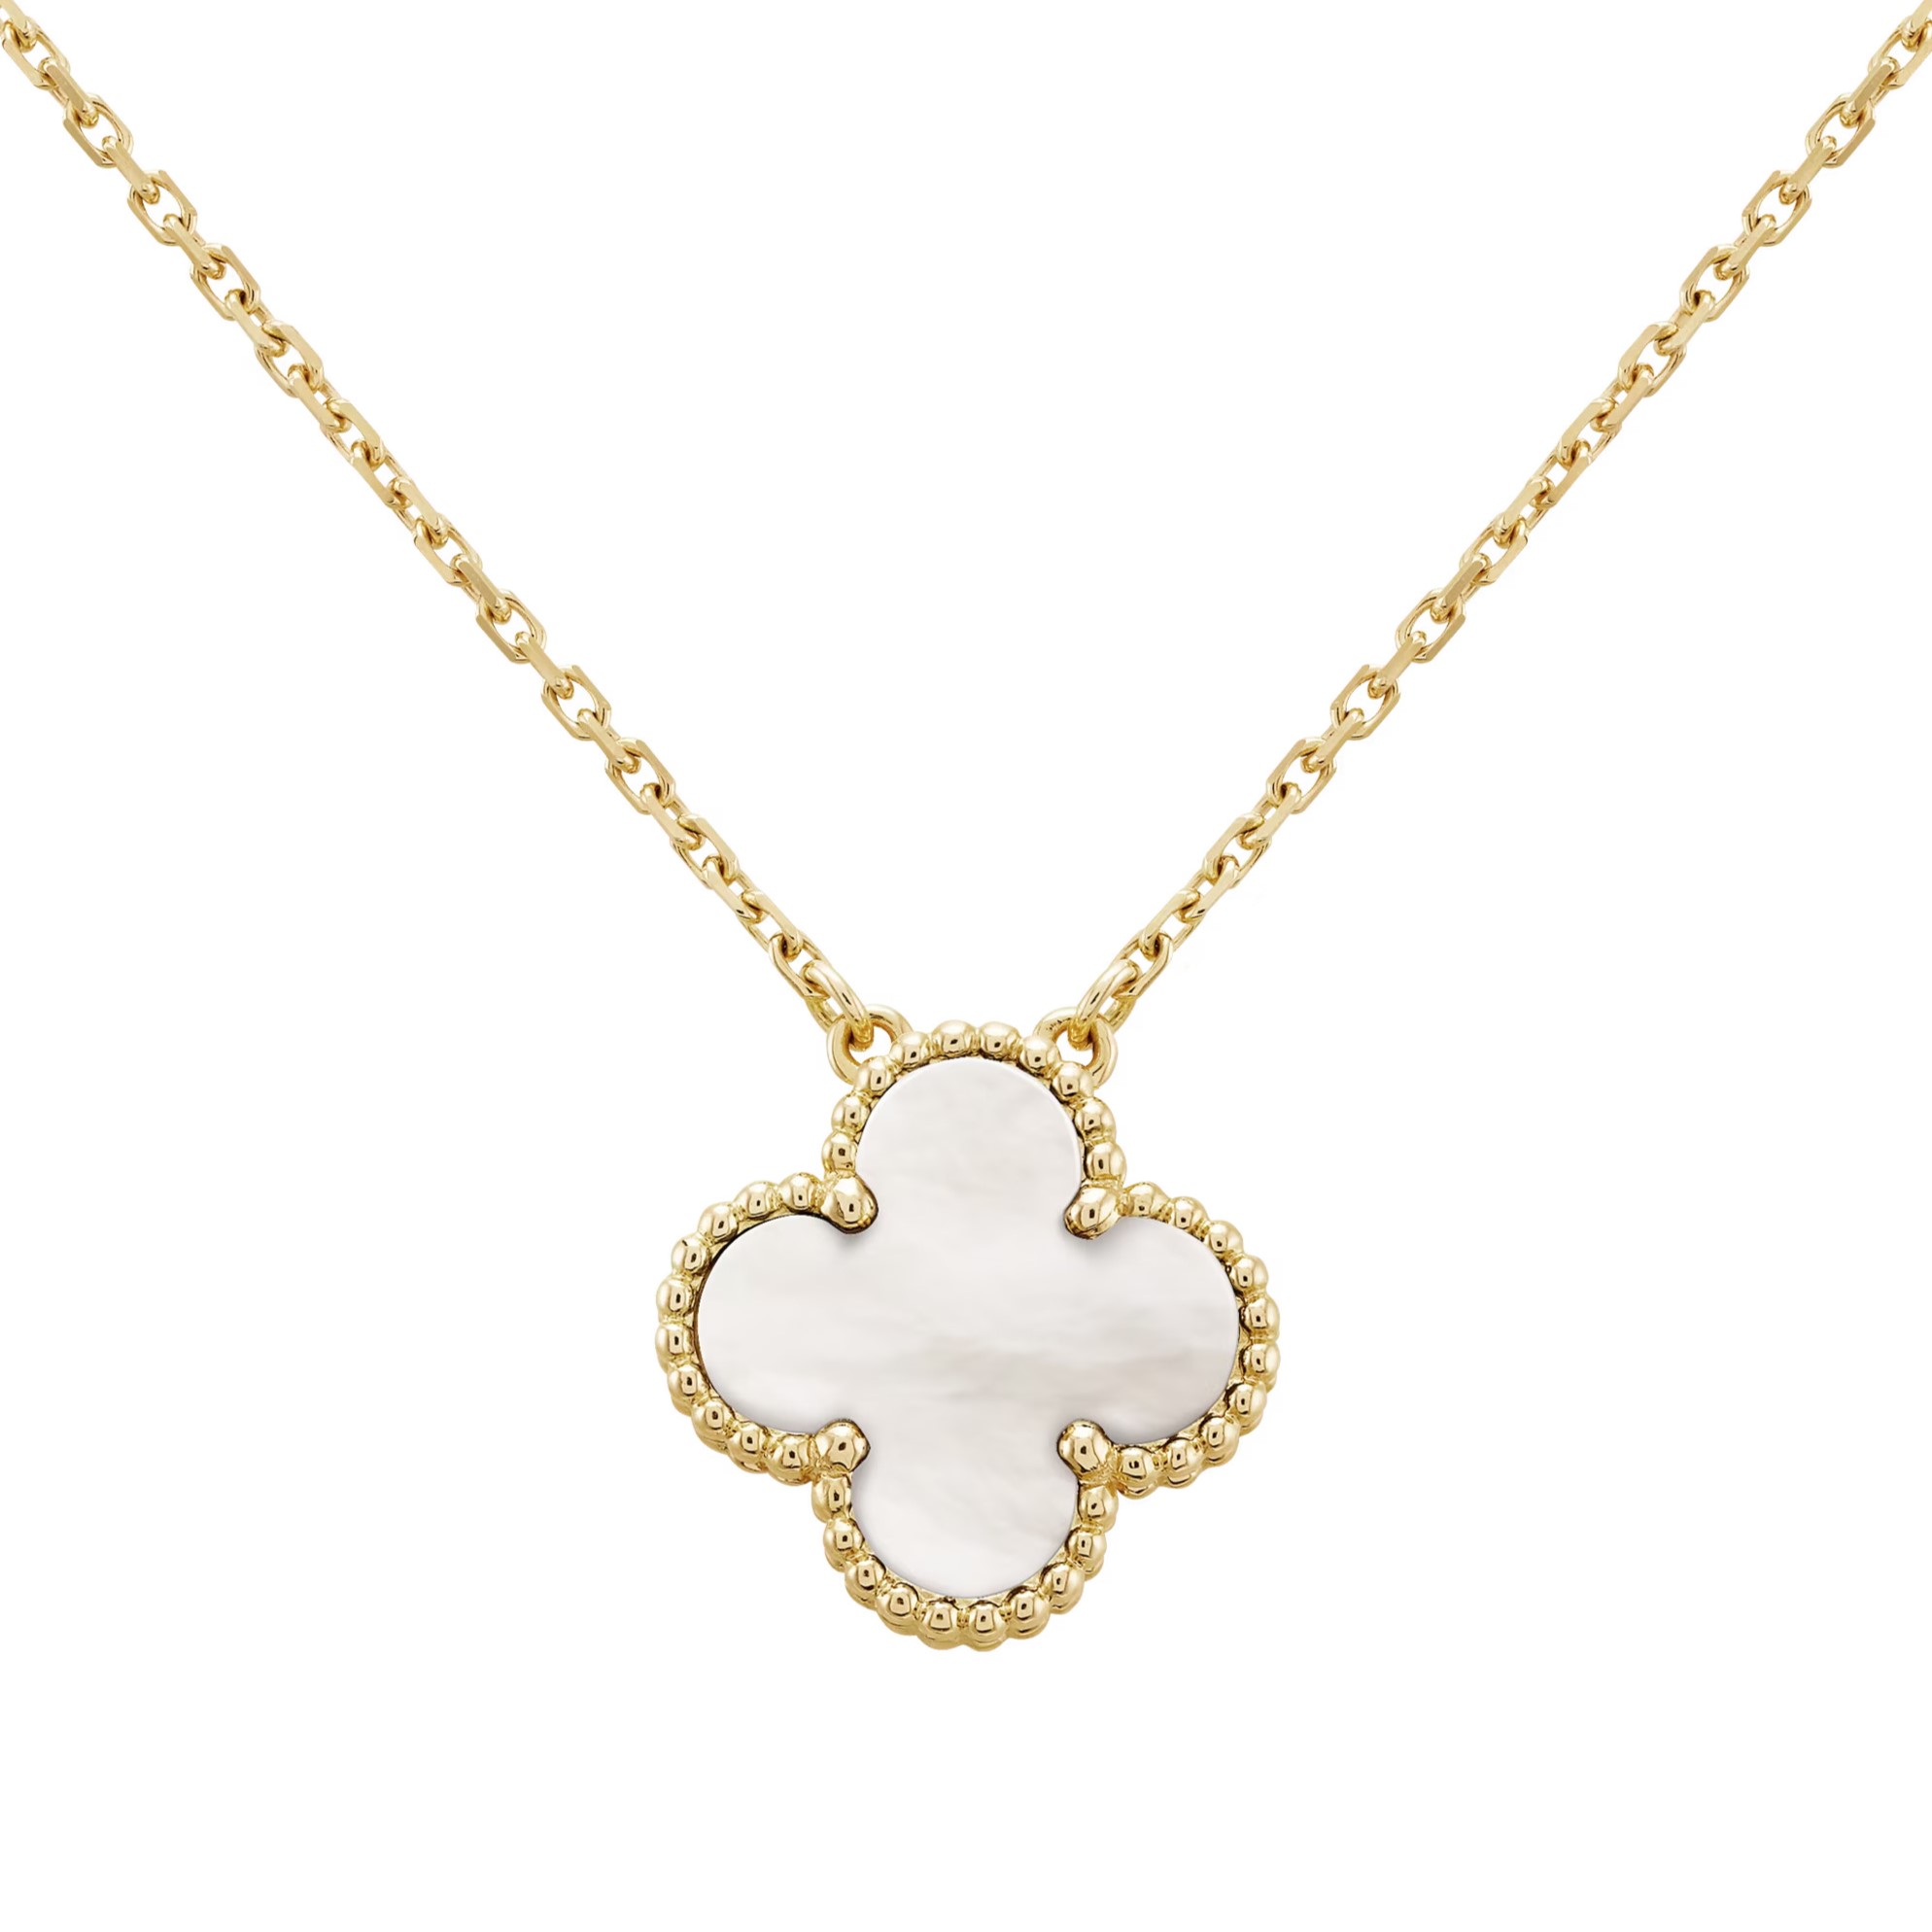 DÂY CHUYỀN CỎ 4 LÁ VAN CLEEF ARPELS VINTAGE ALHAMBRA NECKLACE PENDANT IN STONE WHITE MOTHER-OF-PEARL VCARA45900 1